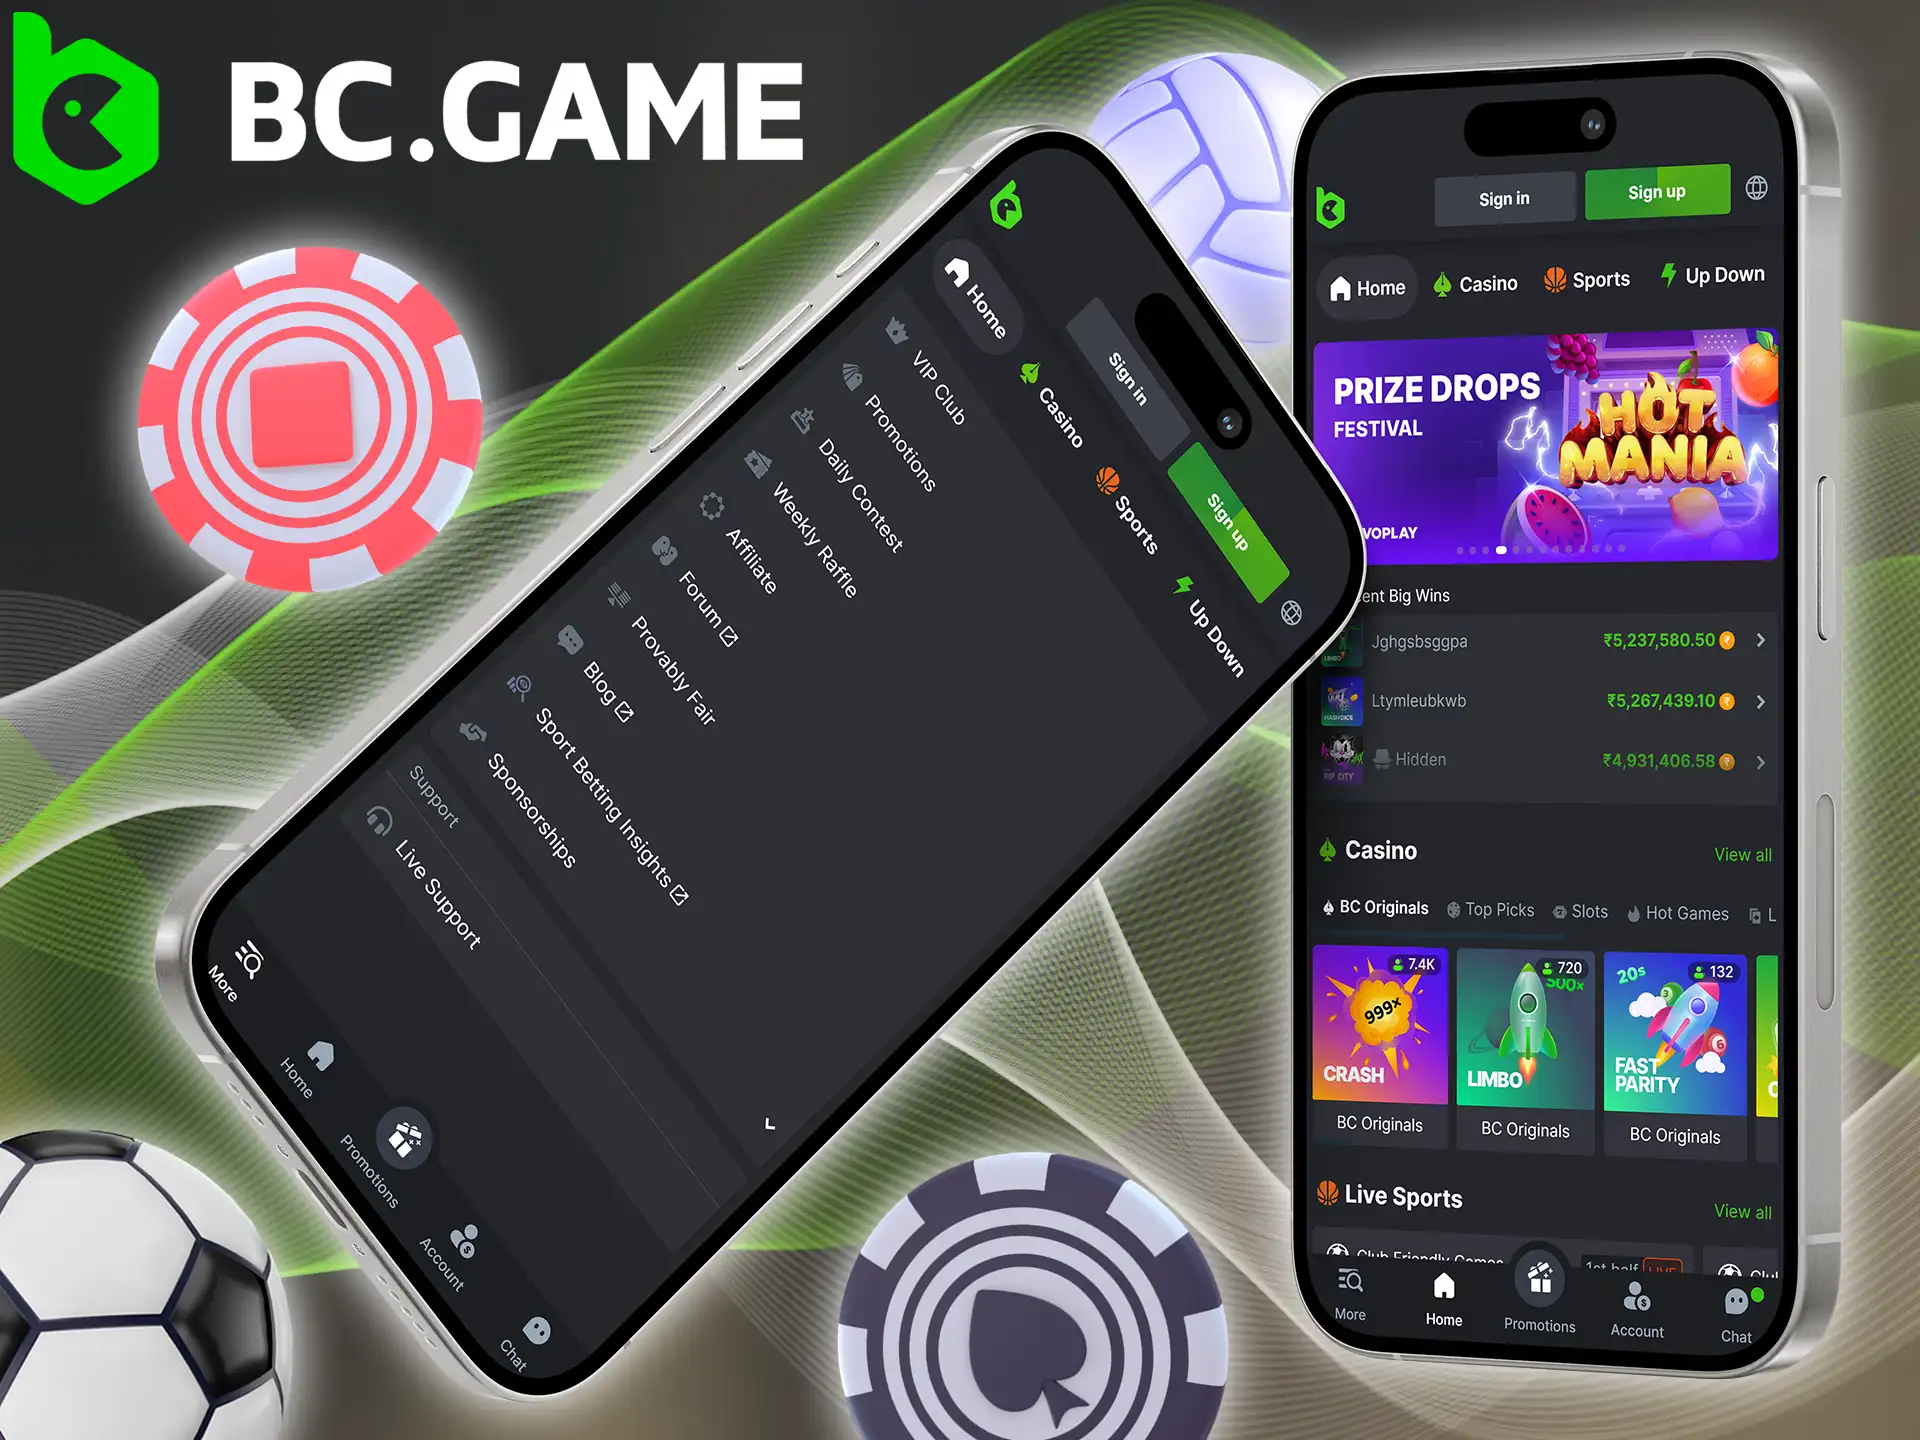 Install the BC Game app on your smartphone to enjoy the game from anywhere.